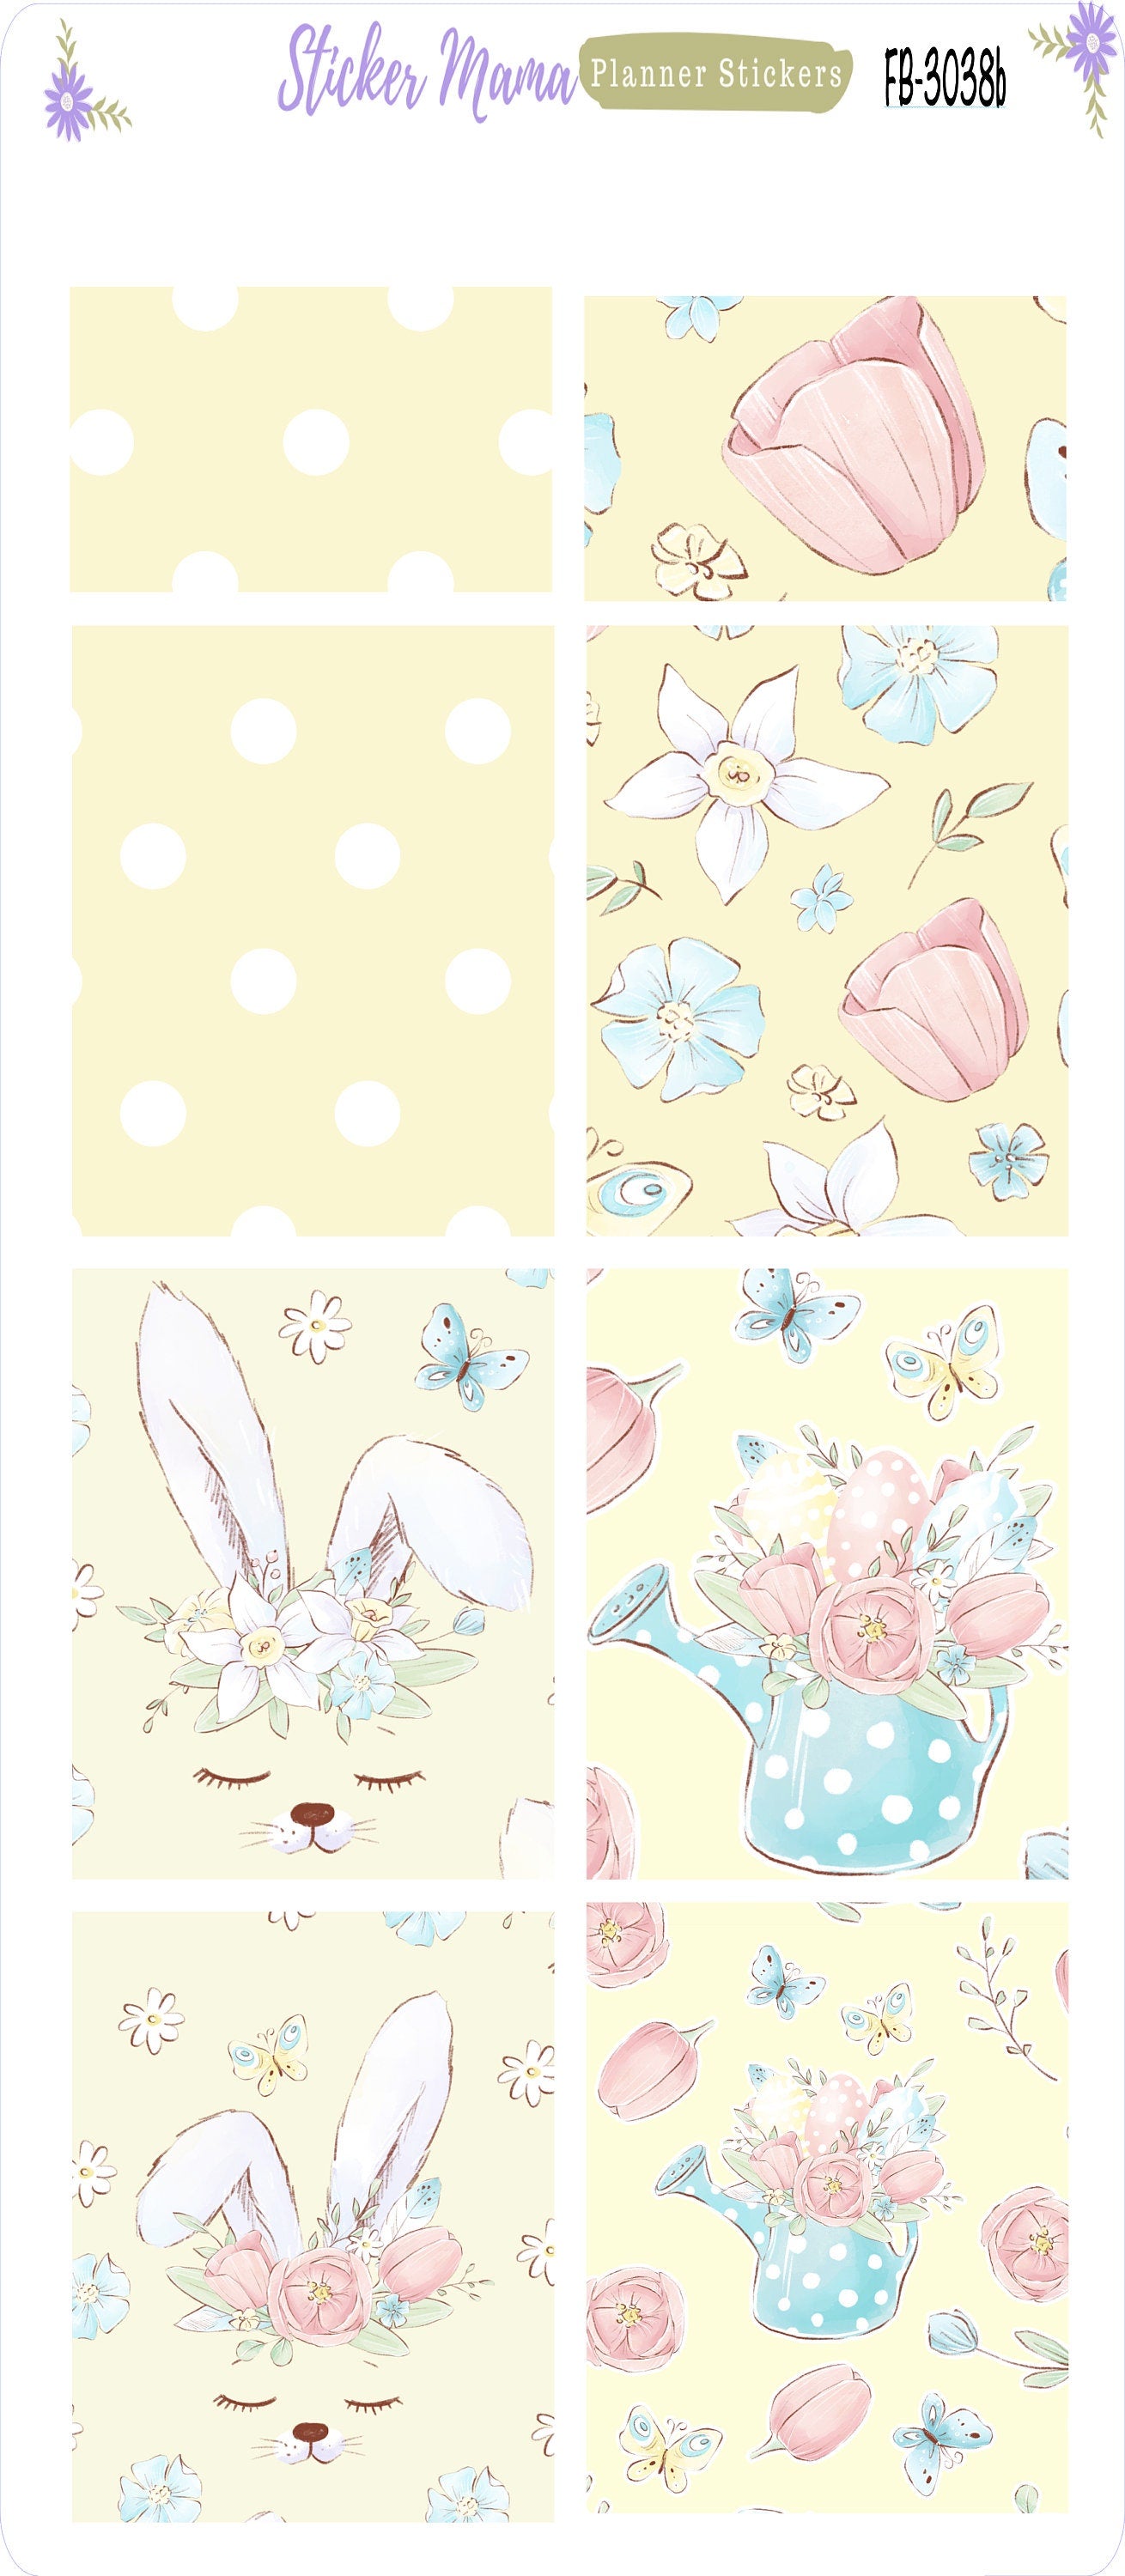 FB-3038 FULL BOX "Easter Spring Time" Stickers || Planner Stickers || Full Box for Planners || Easter Sticker Kit